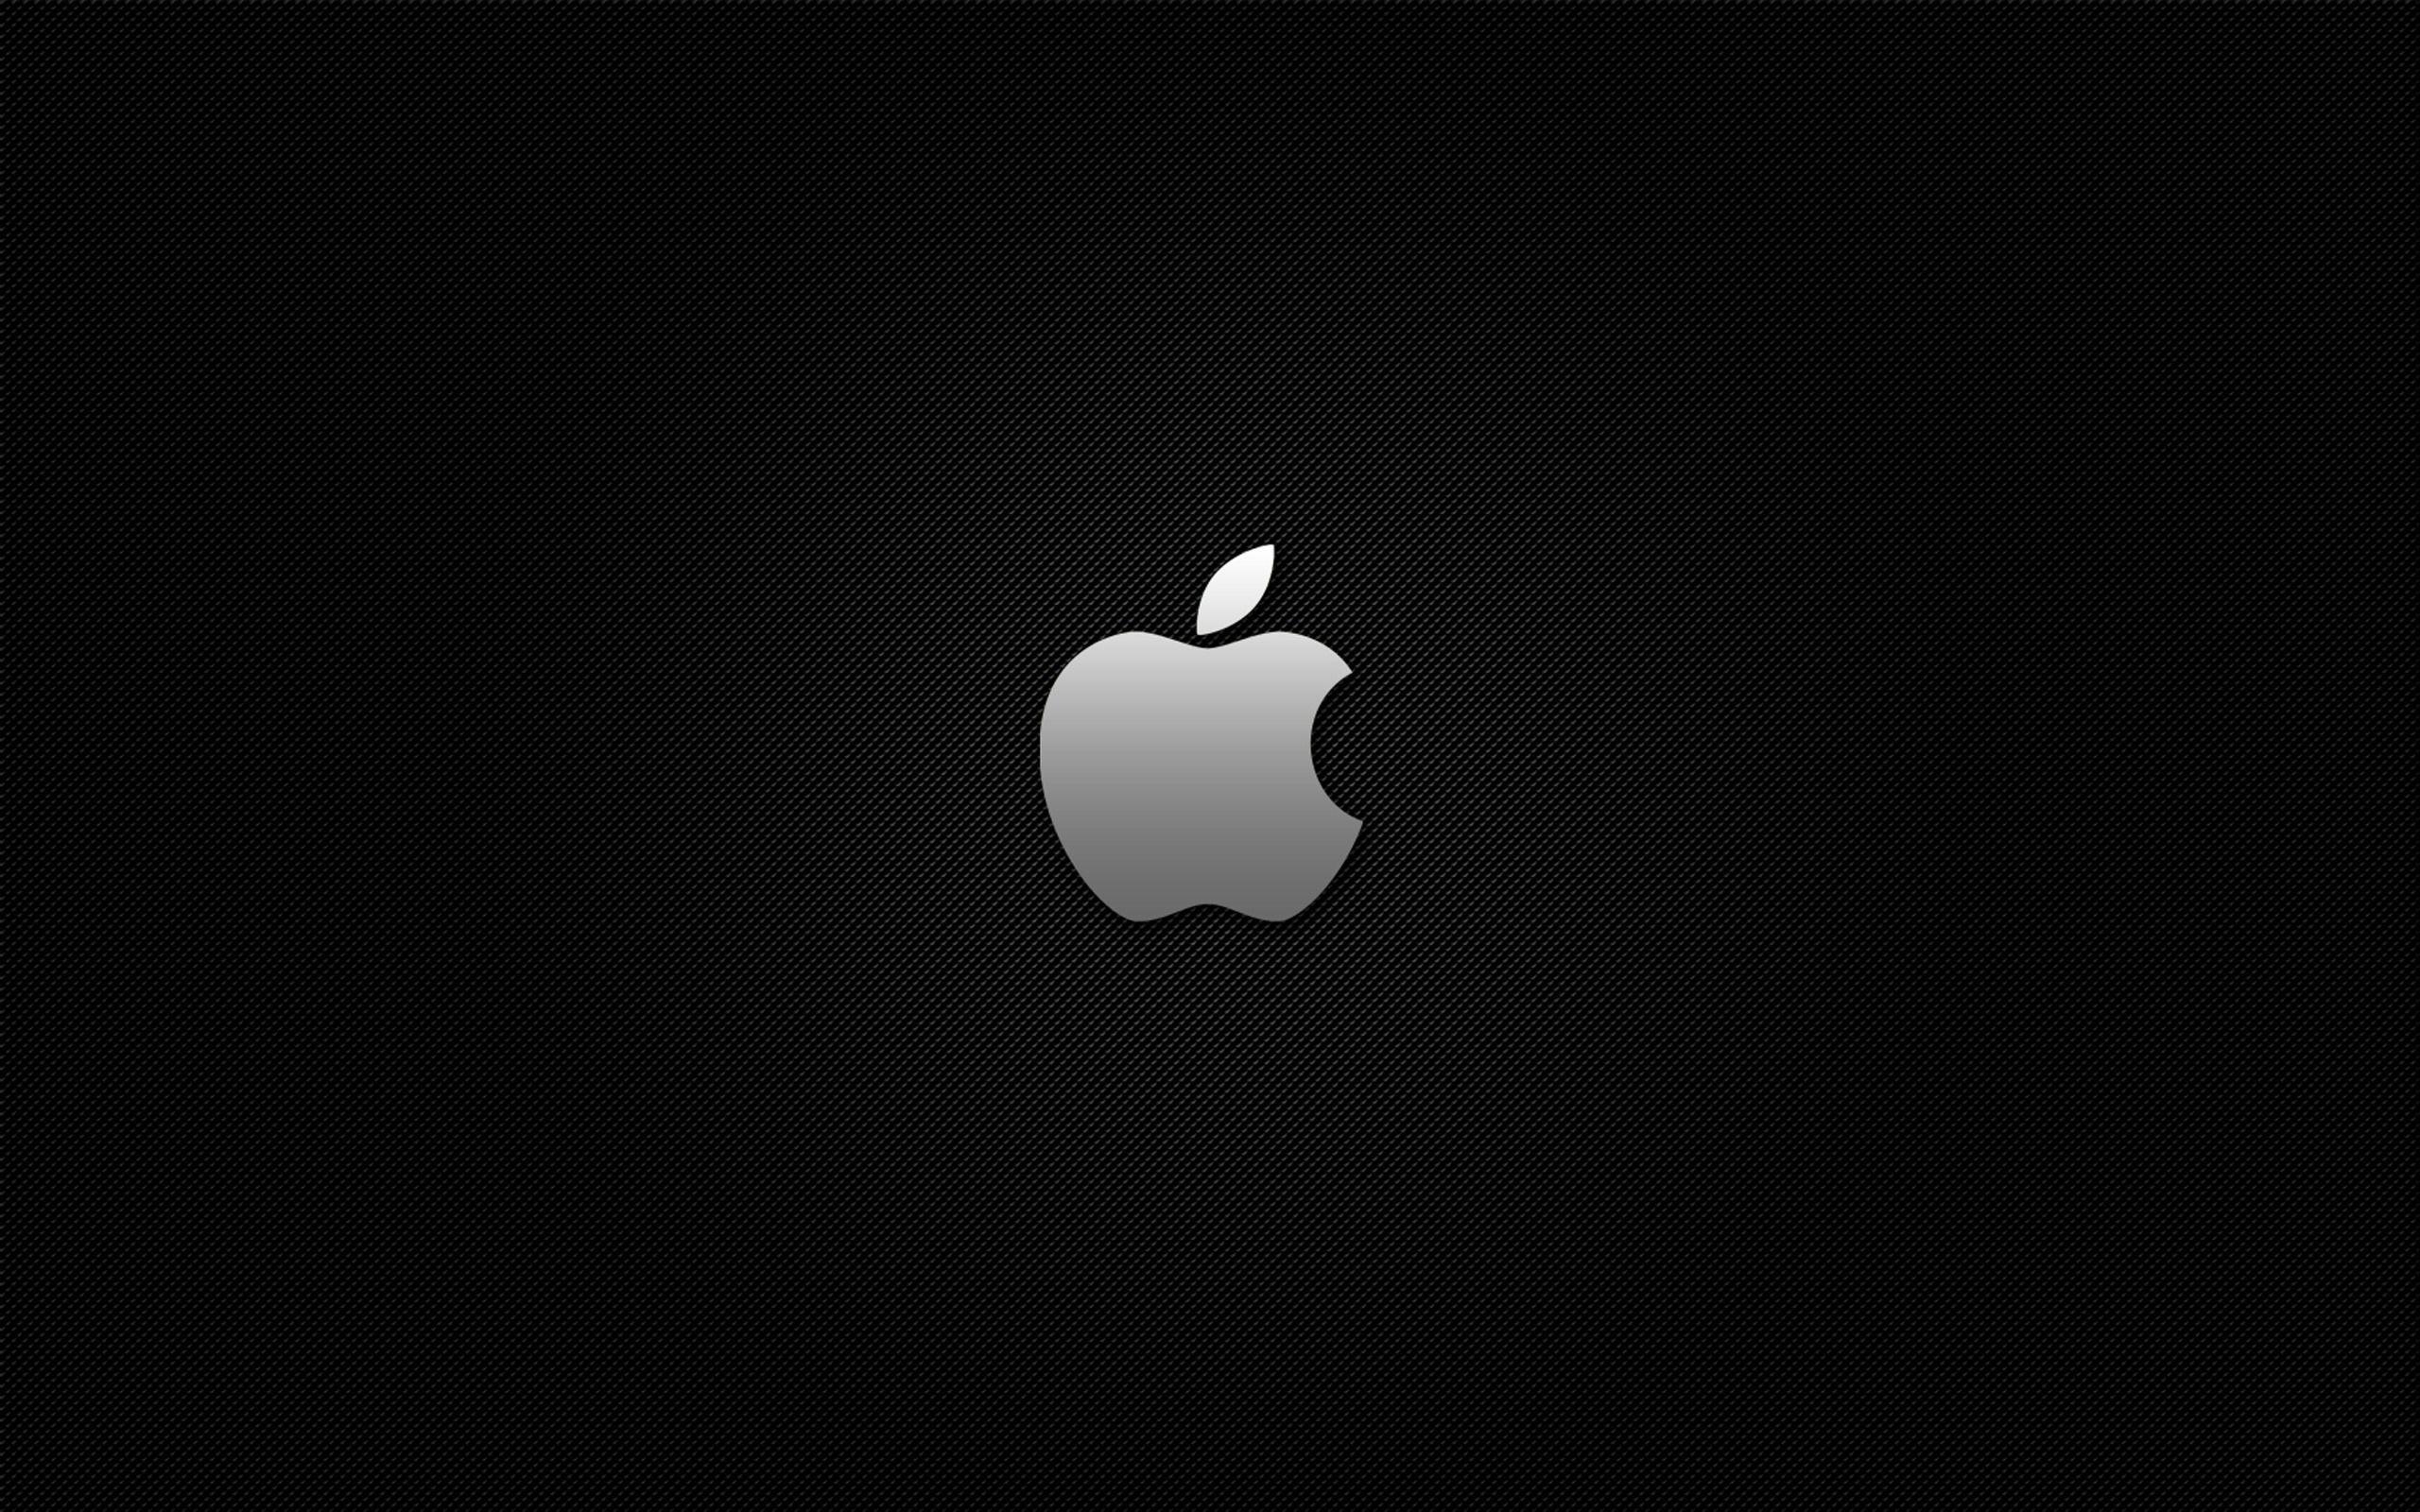 3D wallpaper apple wallpaper for free download about 503